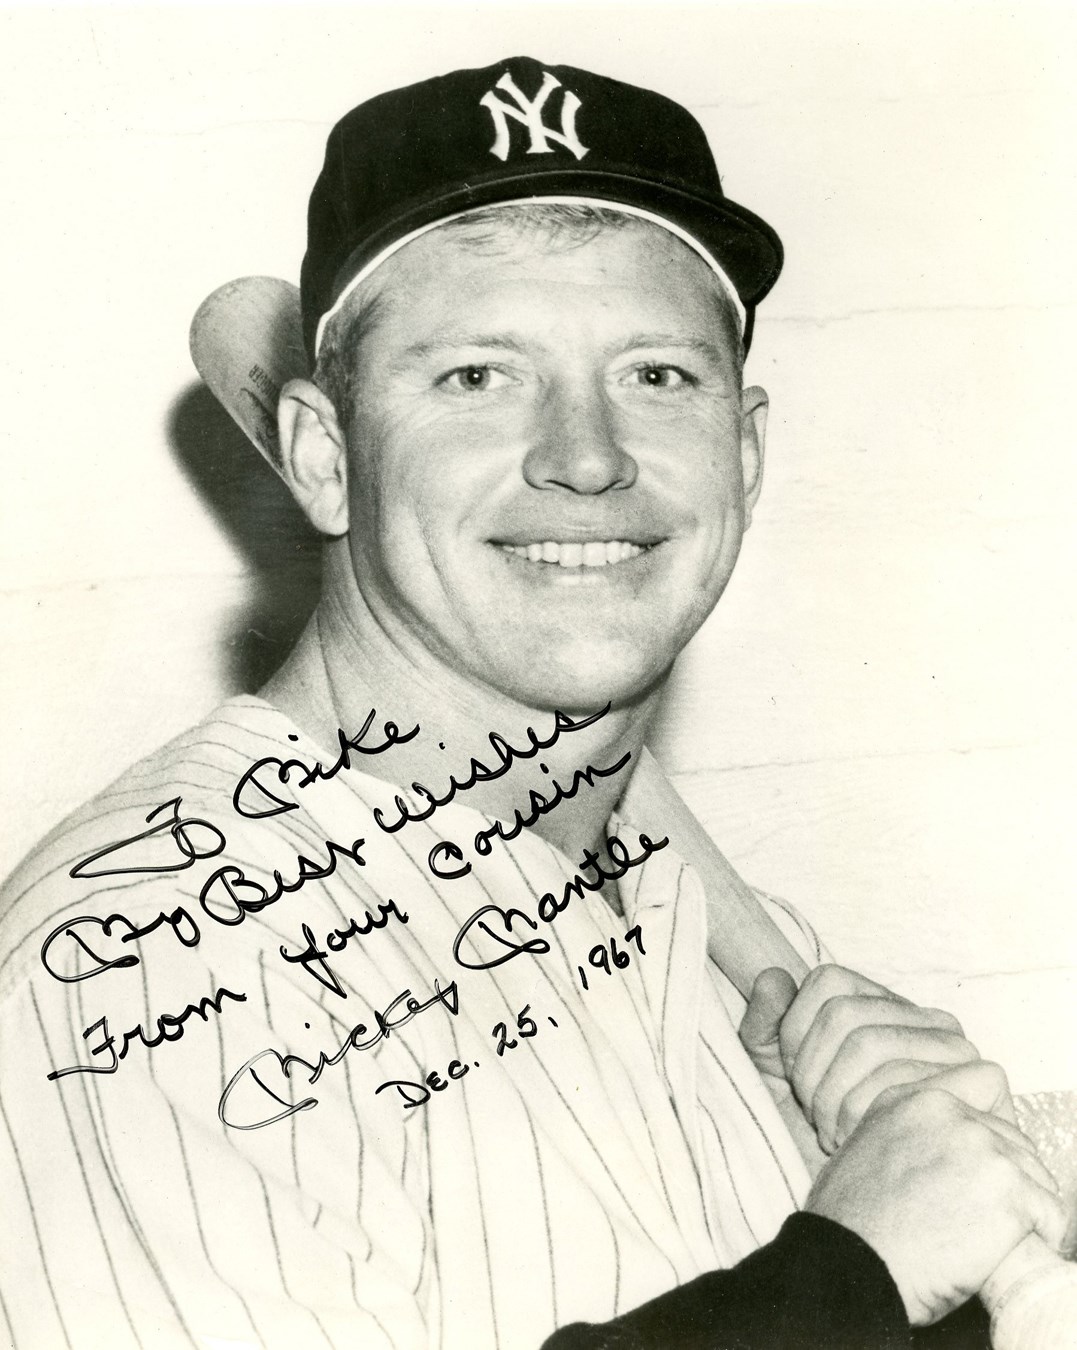 - Mickey Mantle Signed "Christmas" Photo Inscribed to His Cousin - Gifted on Christmas Day (PSA/DNA)